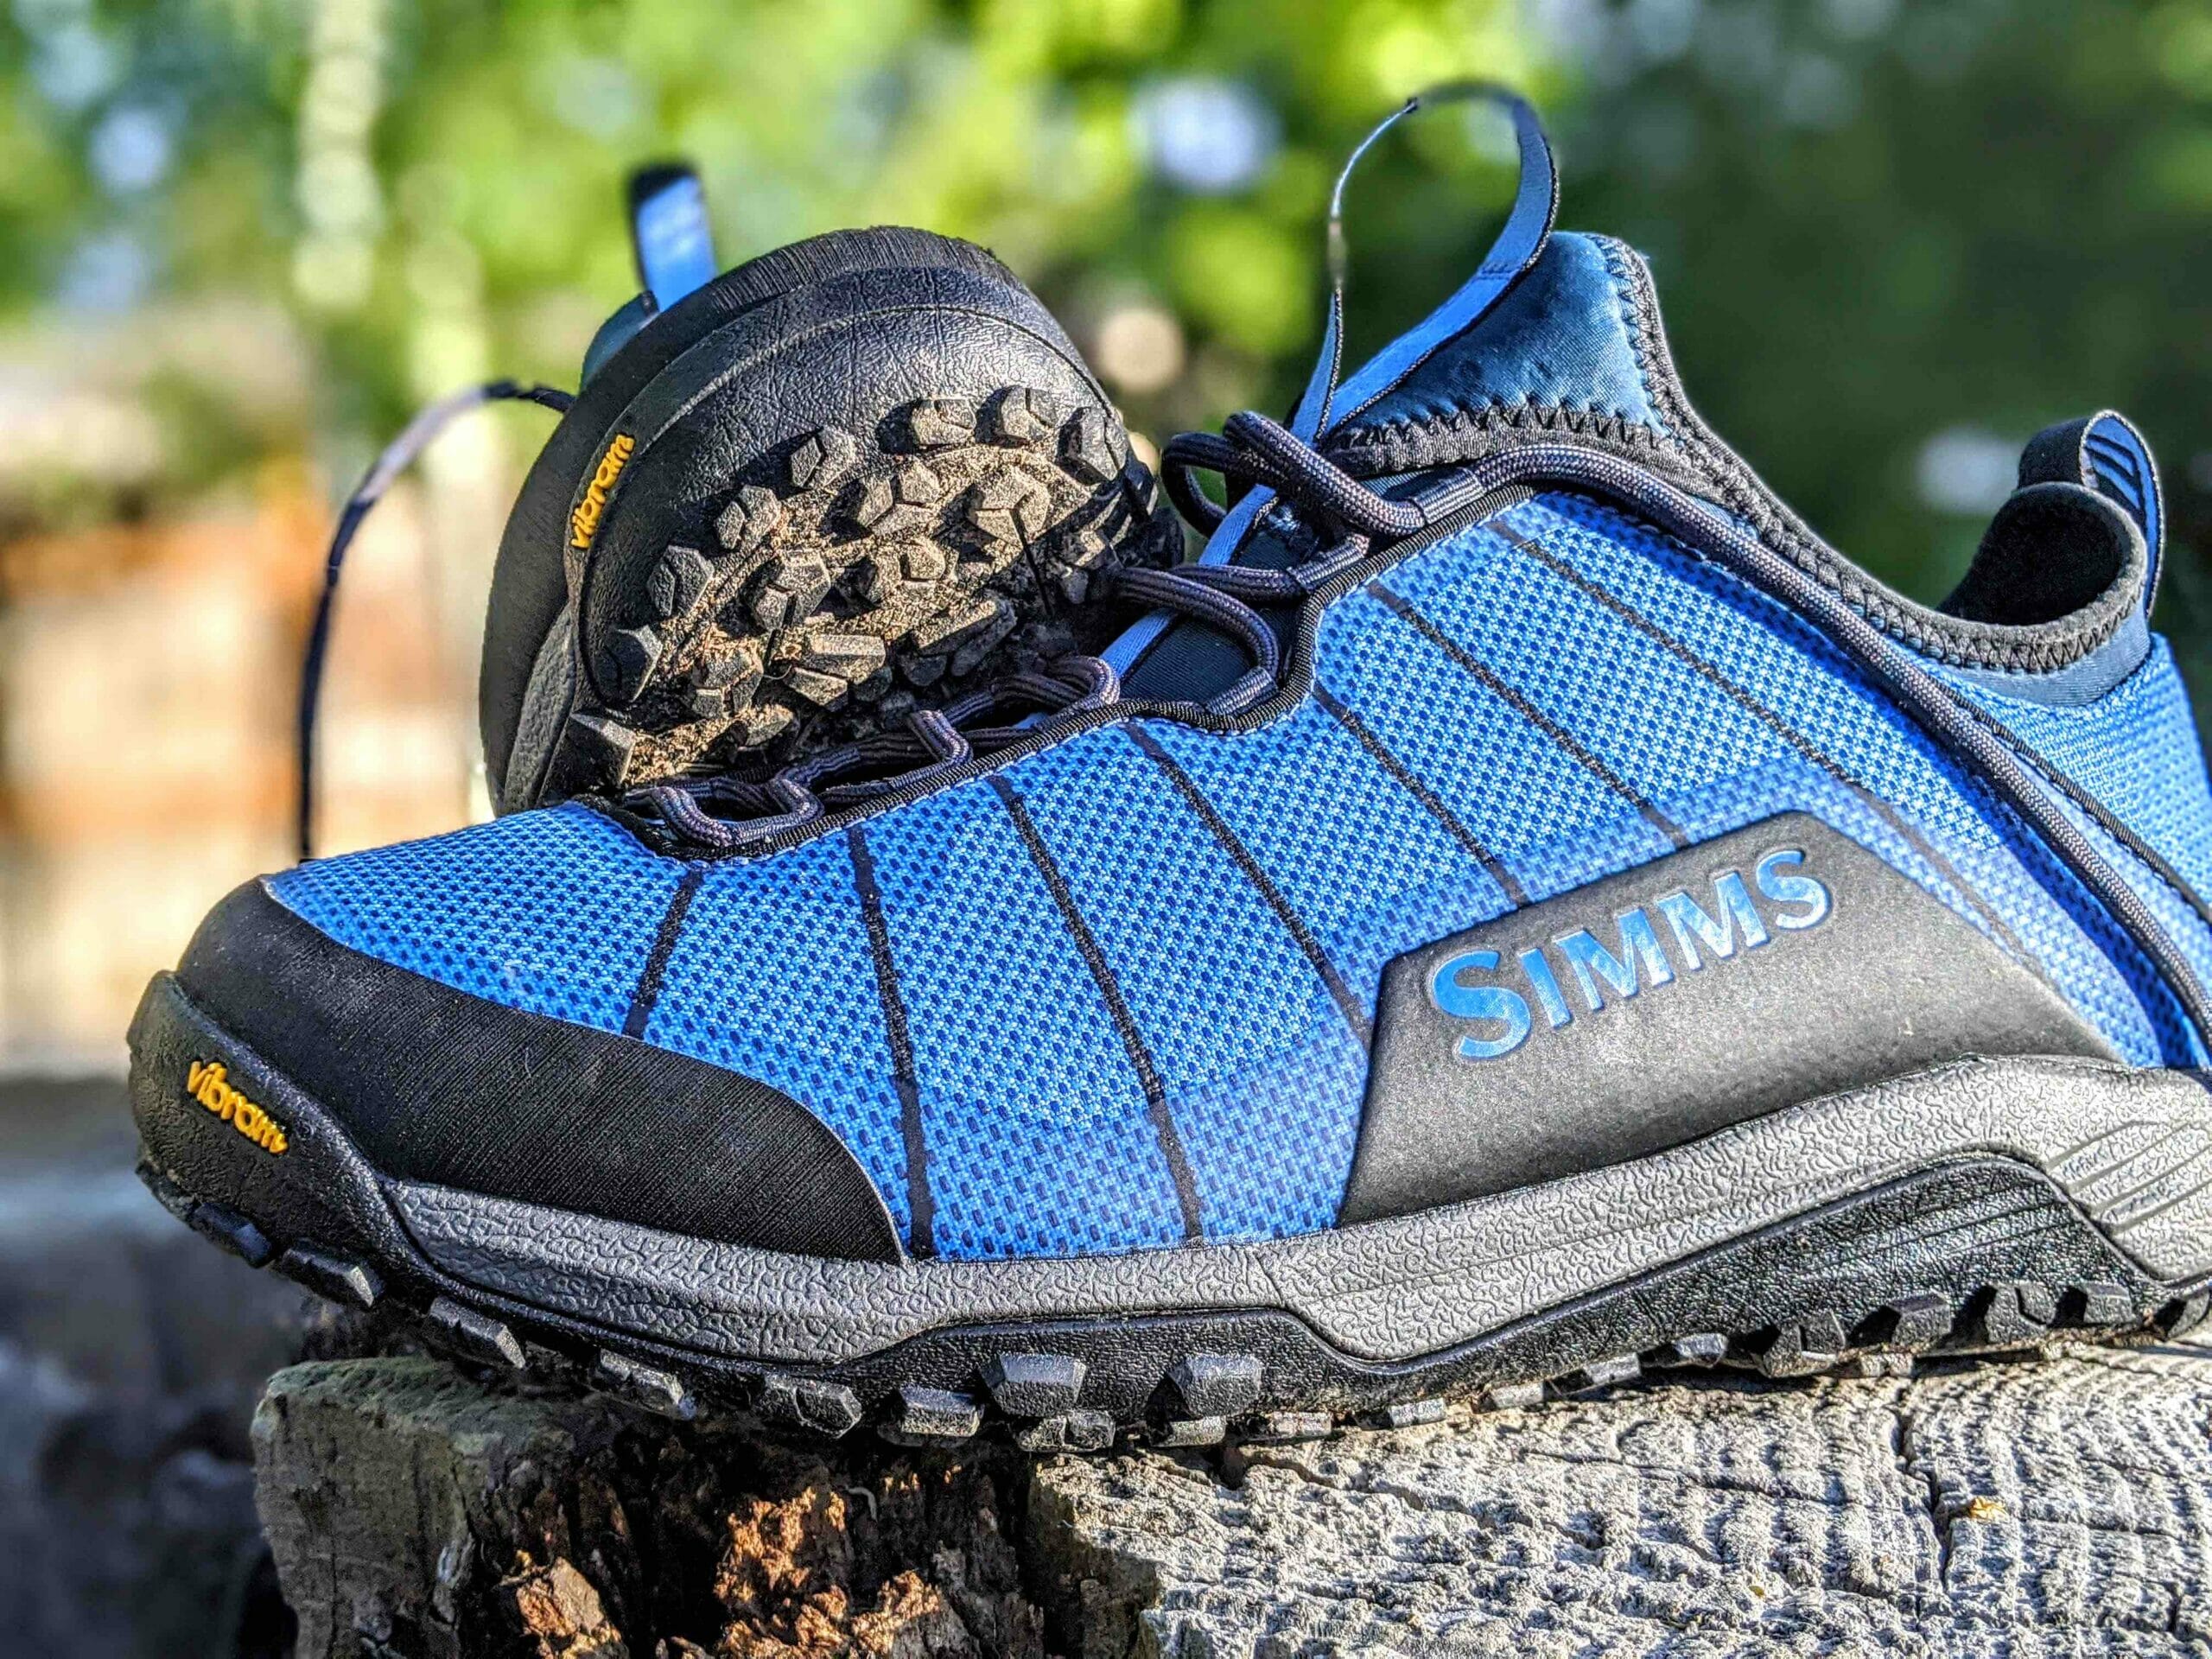 Simms FlyWeight Wading Boot Review